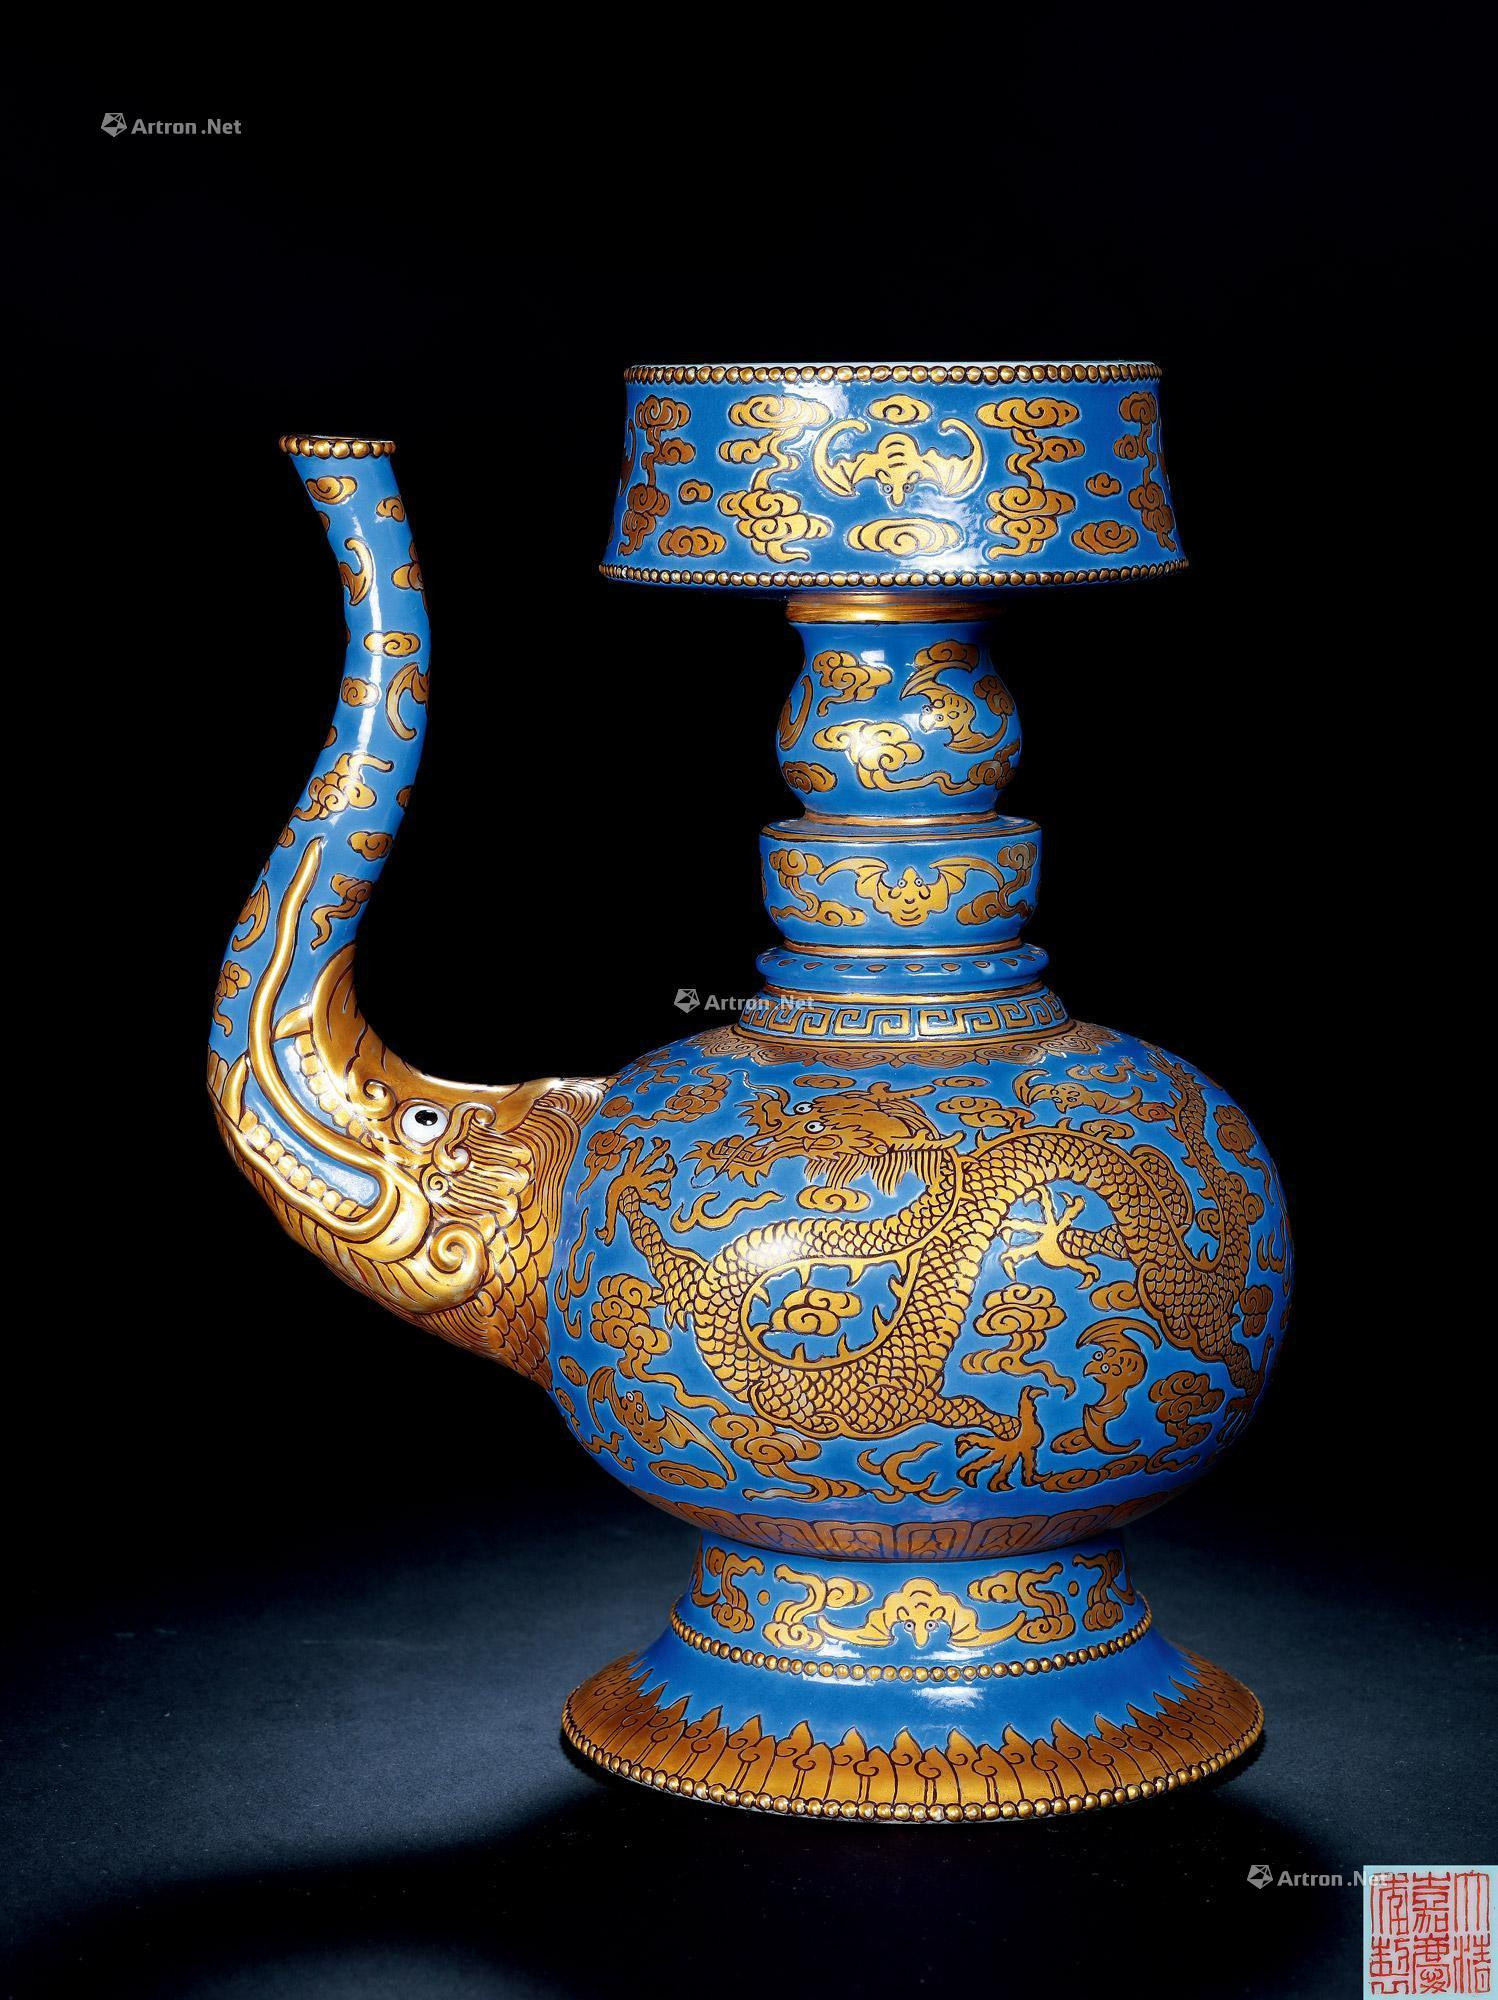 AN EXCEPTIONAL BLUE-GROUNDED GILT-PAINTED‘DRAGON’ ALTAR VASE